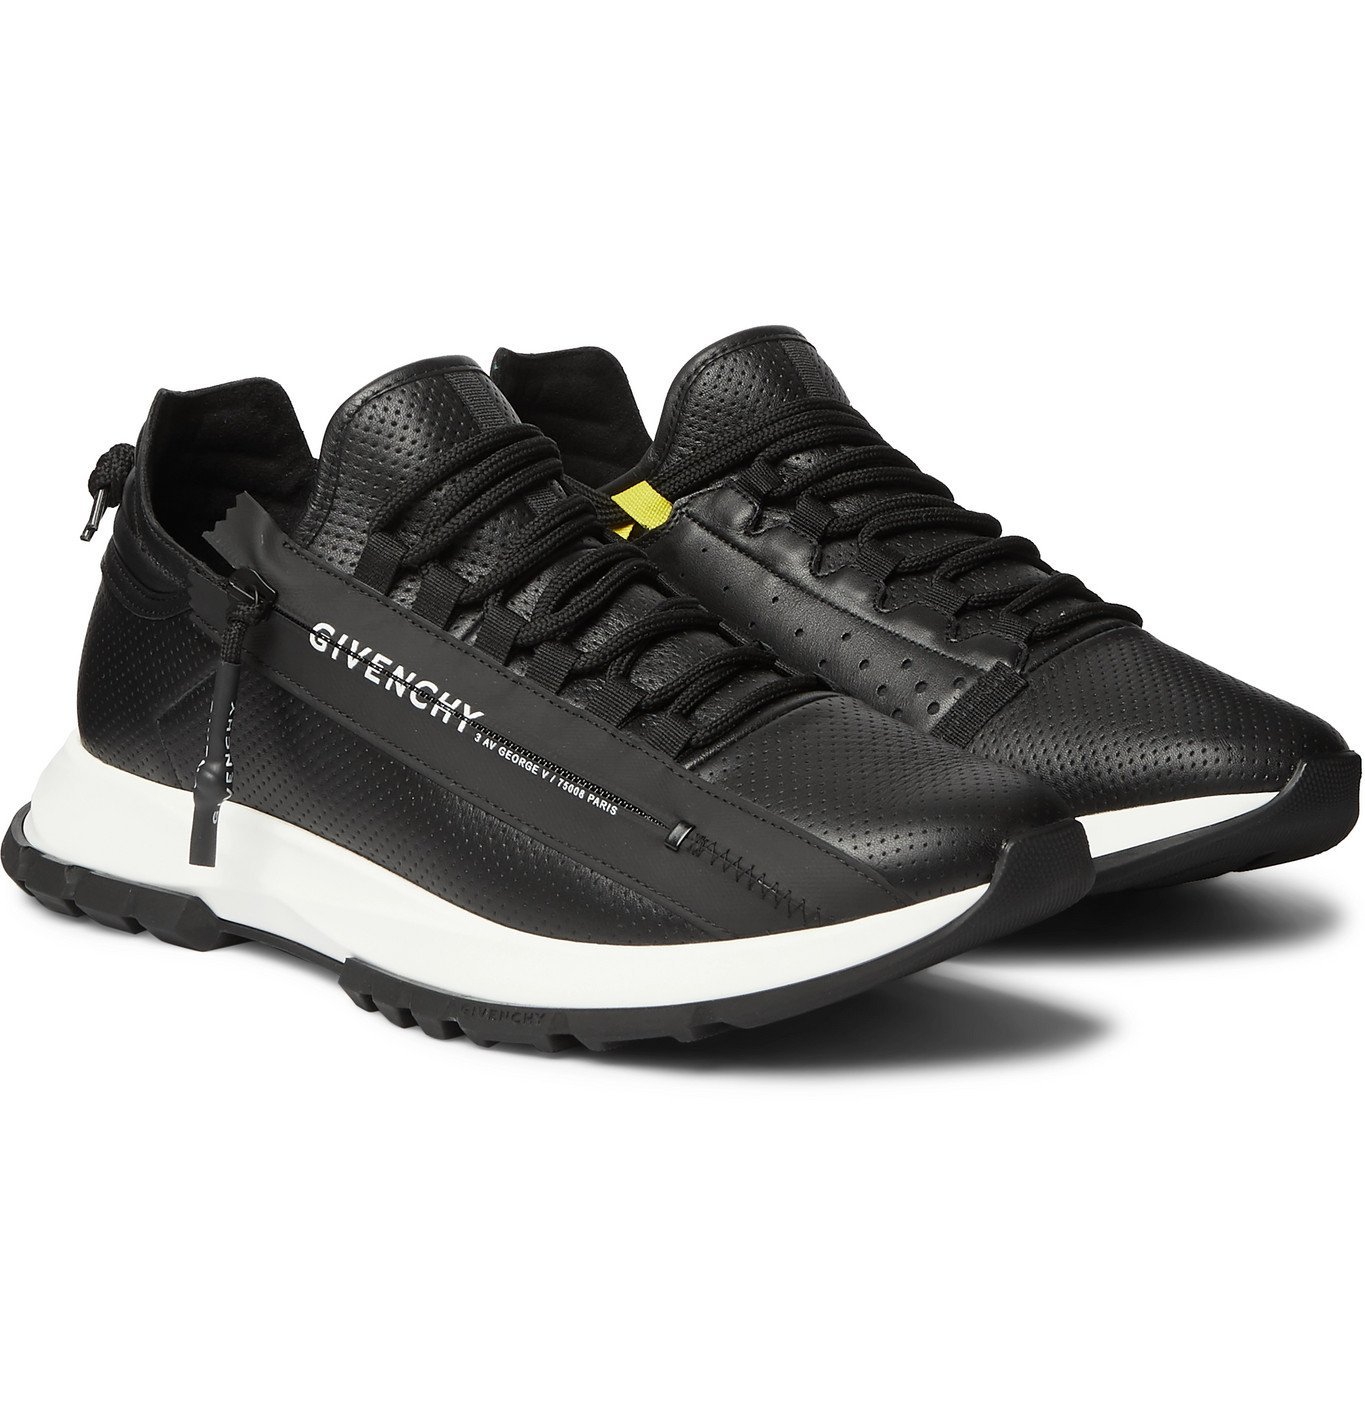 givenchy perforated sneakers